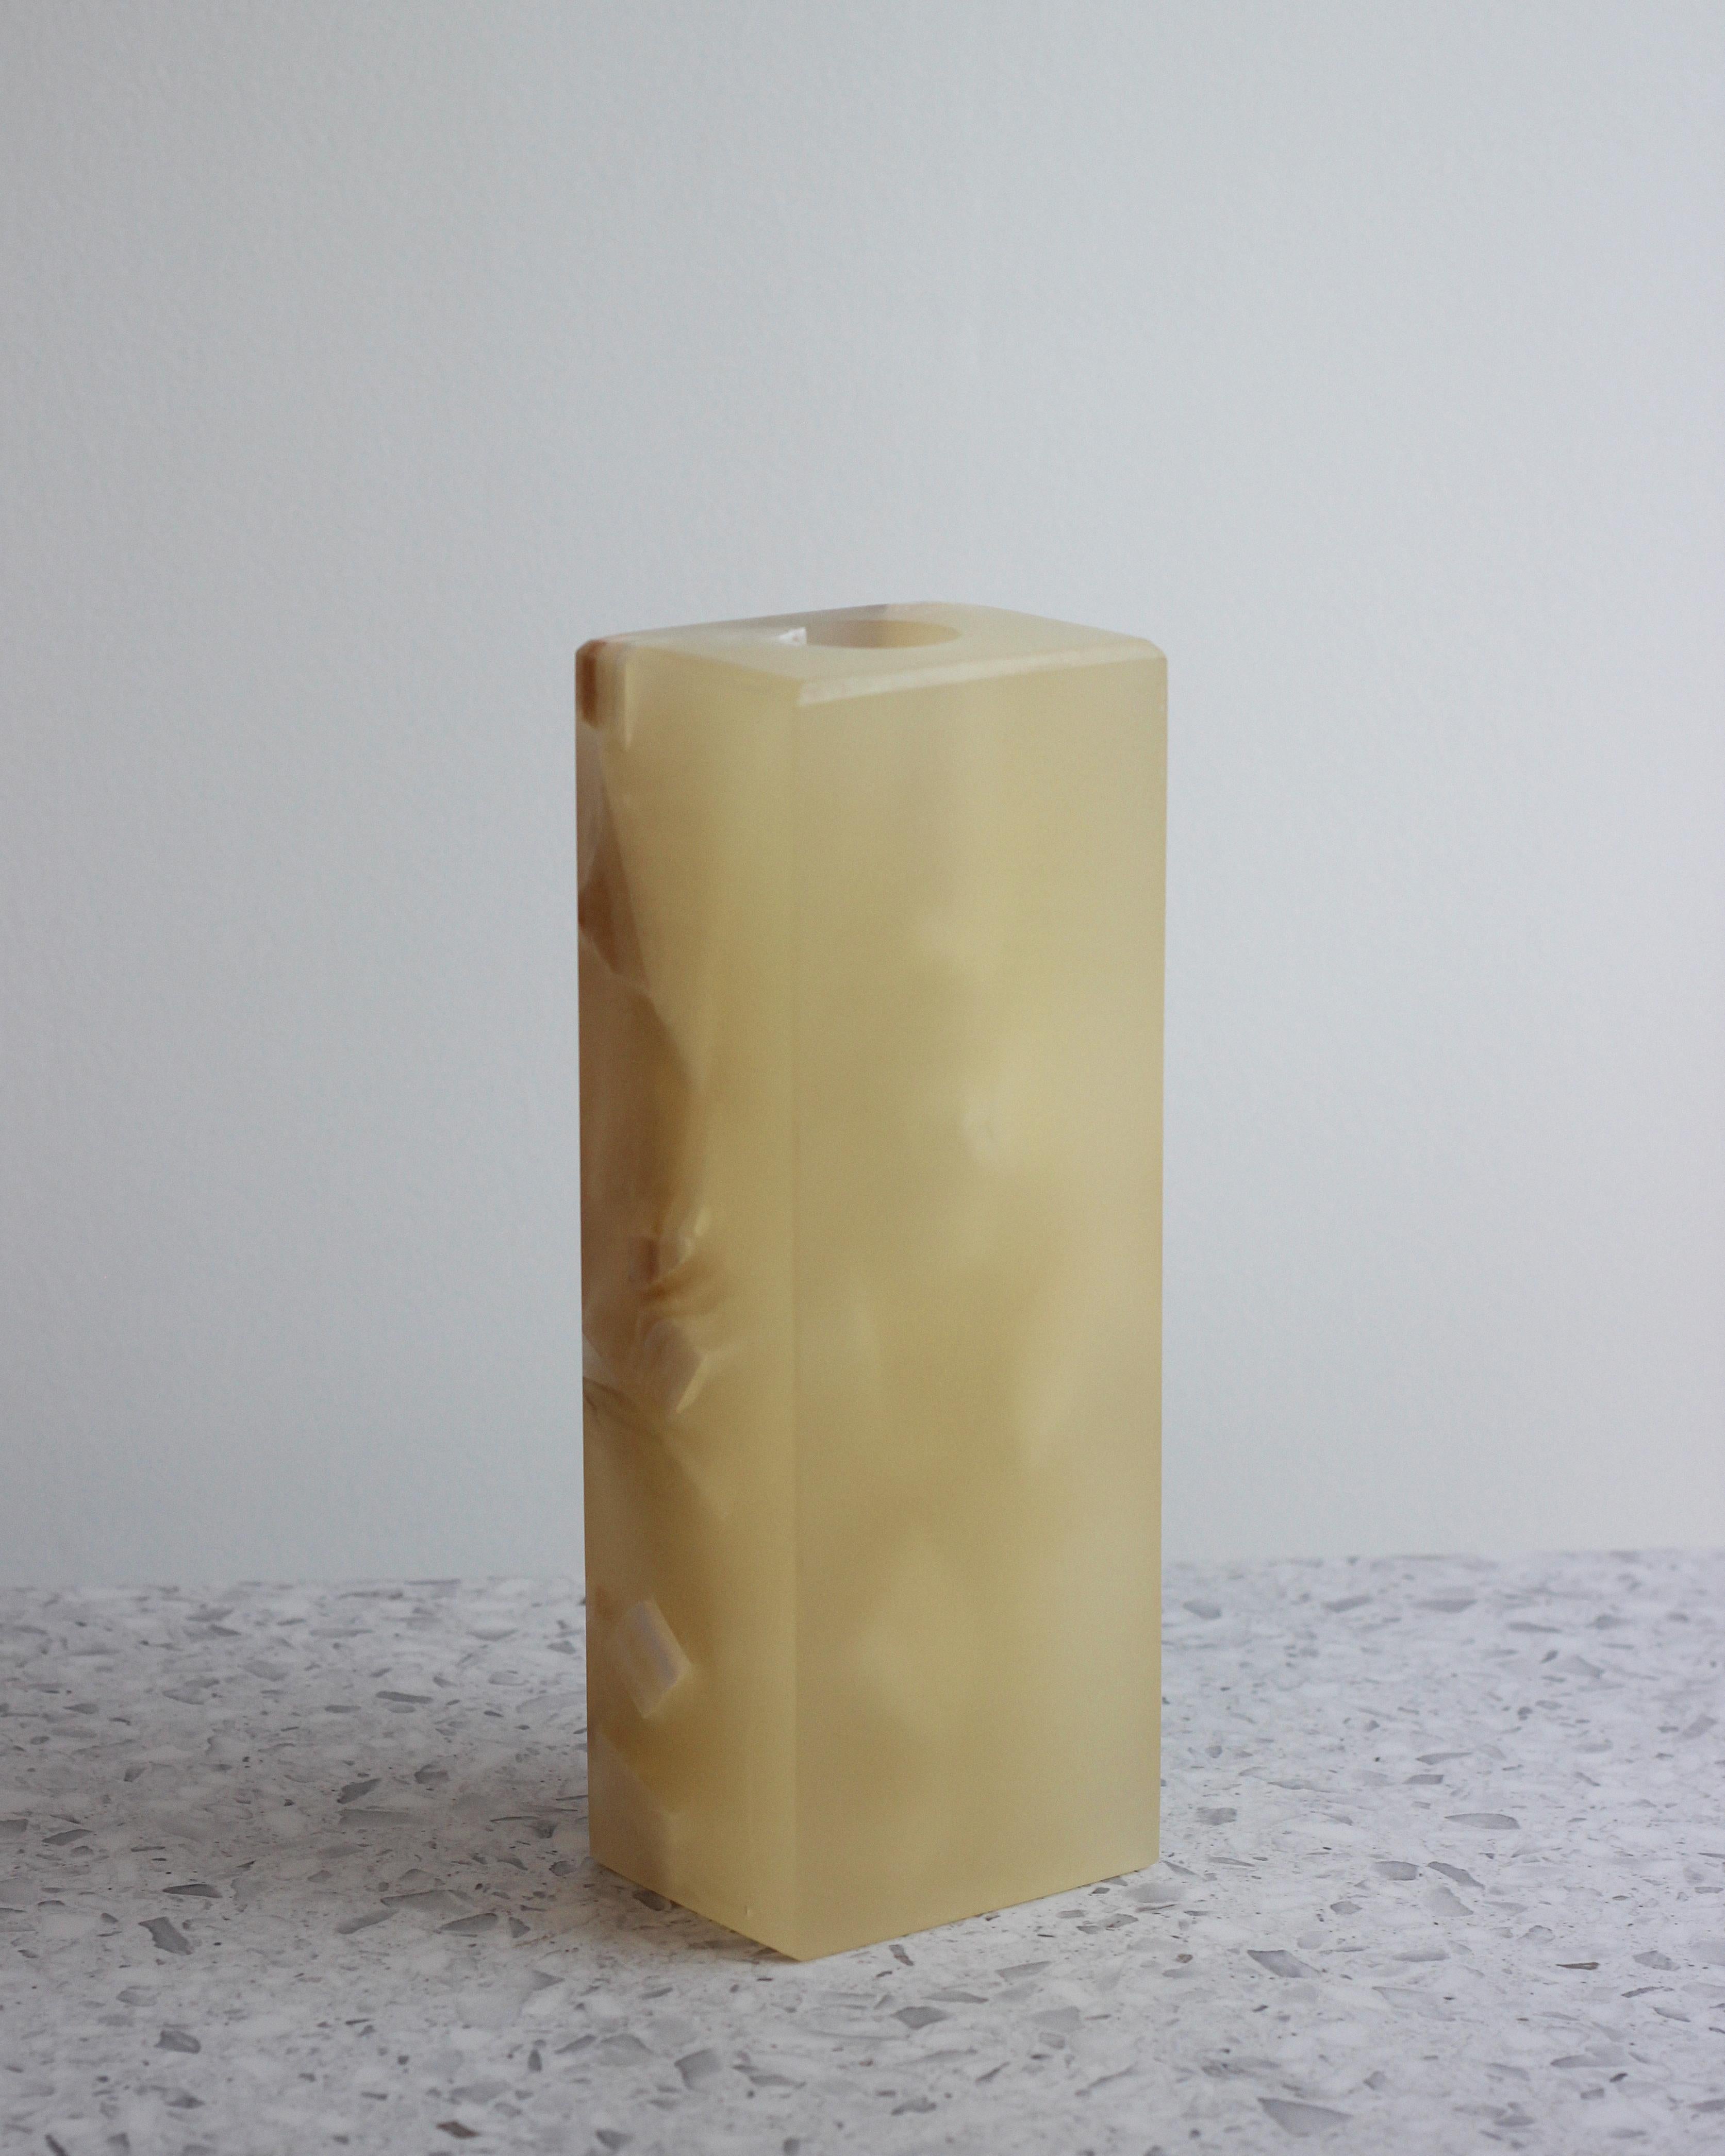 Crystal resin and marble, fragment vase, Jang Hea Kyoung
Artist: Jang Hea Kyoung
Materials: Crystal resin and marble
Dimensions: 24 x 9 x 7 cm

Jang Hea Kyoung is based in Seoul, Republic of Korea. She searches for Craft elements and makes